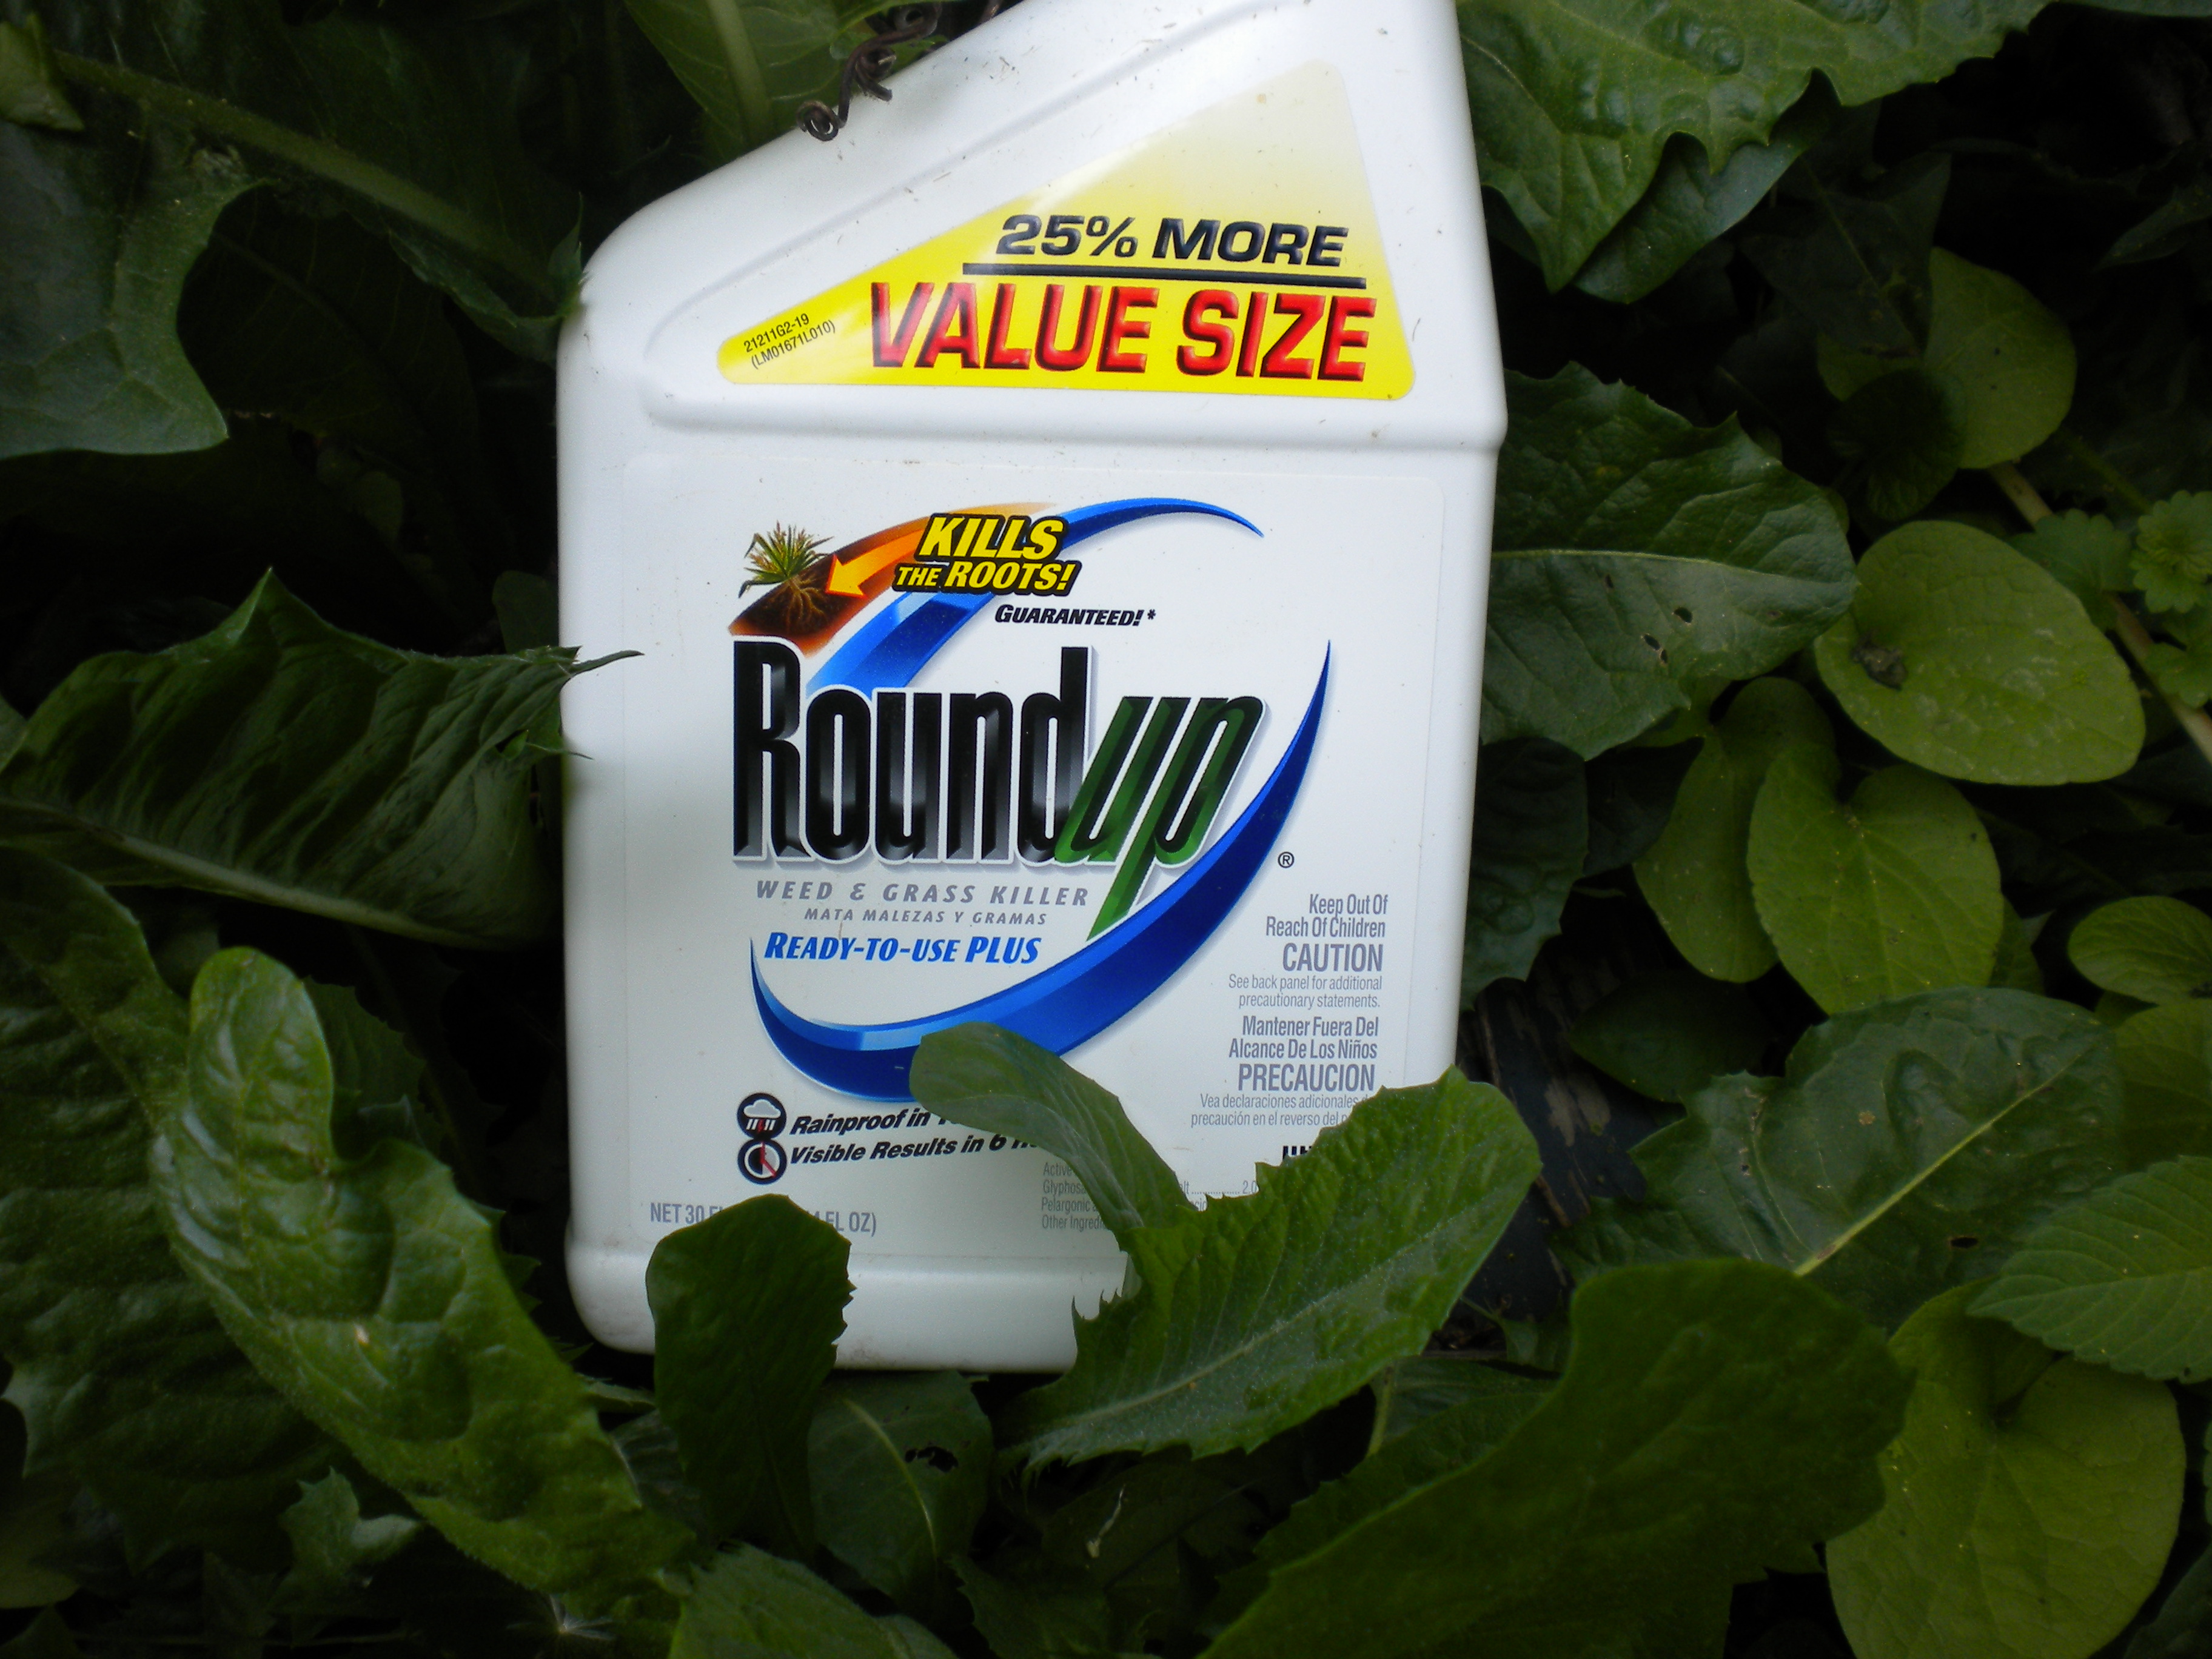 Monsanto weed killer can ‘probably’ cause cancer: World Health Organization